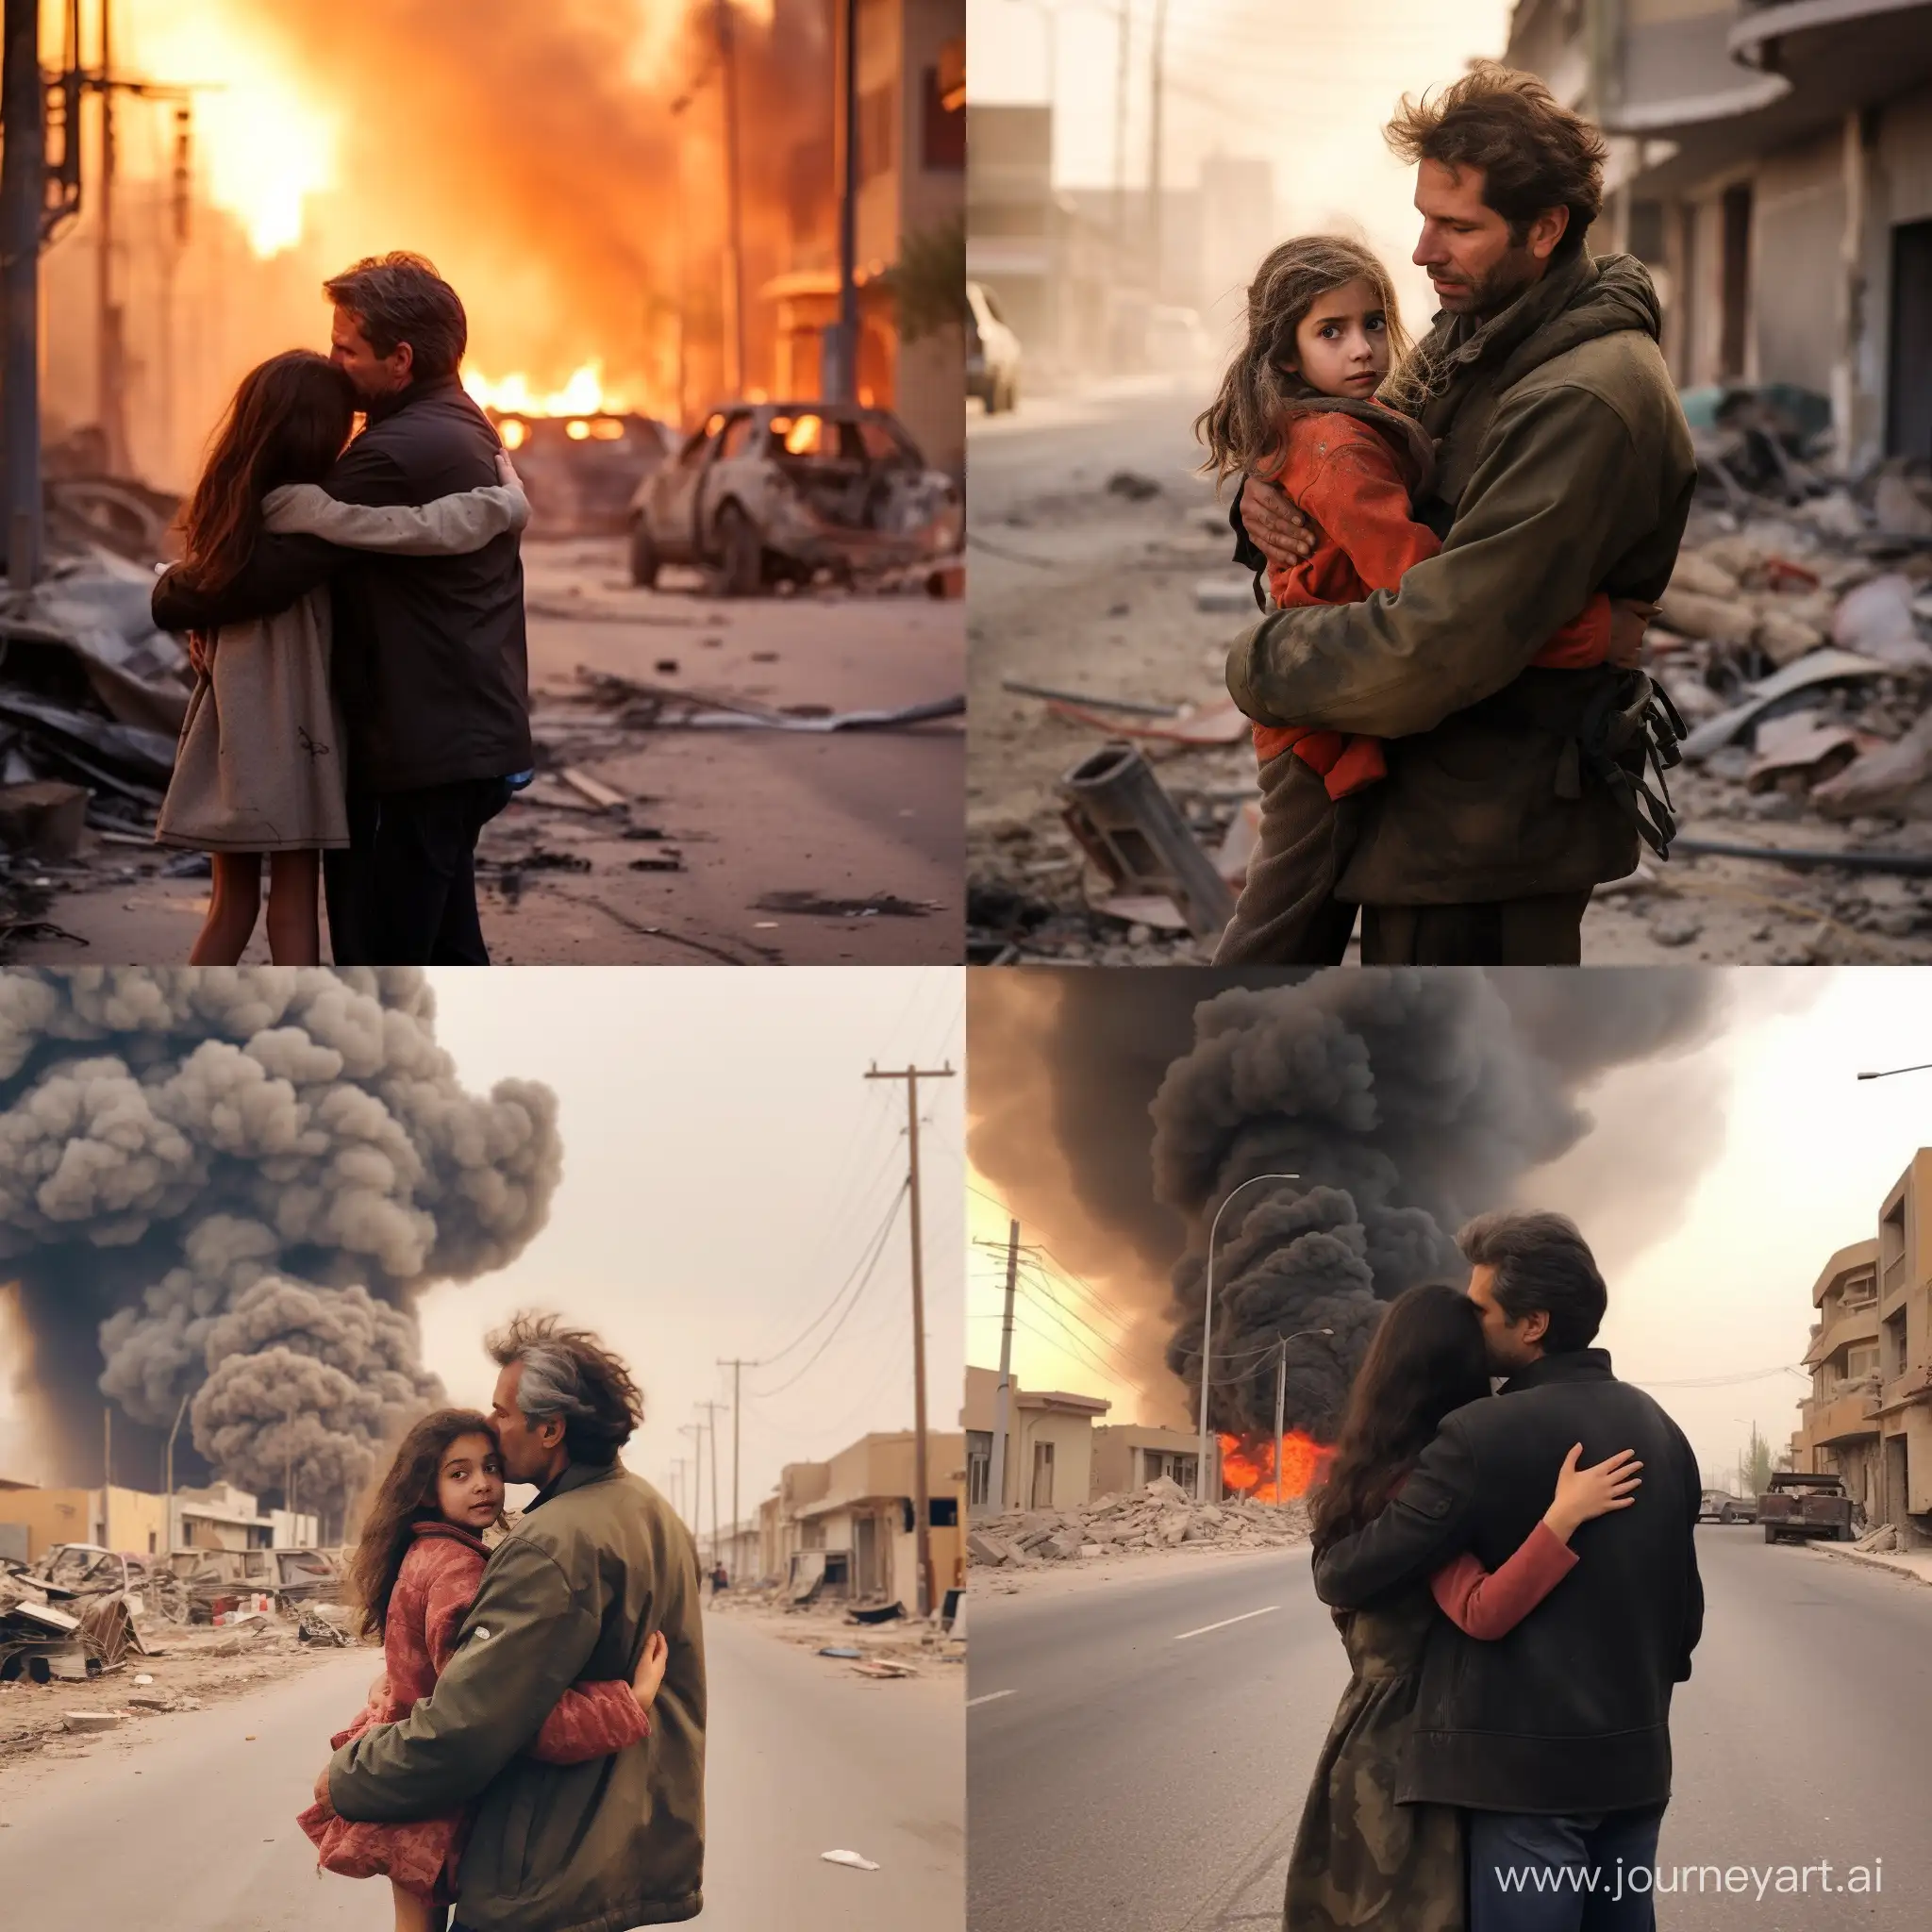 A man hugging his daughter in the street of Kerman, Iran, from an explosion in the street